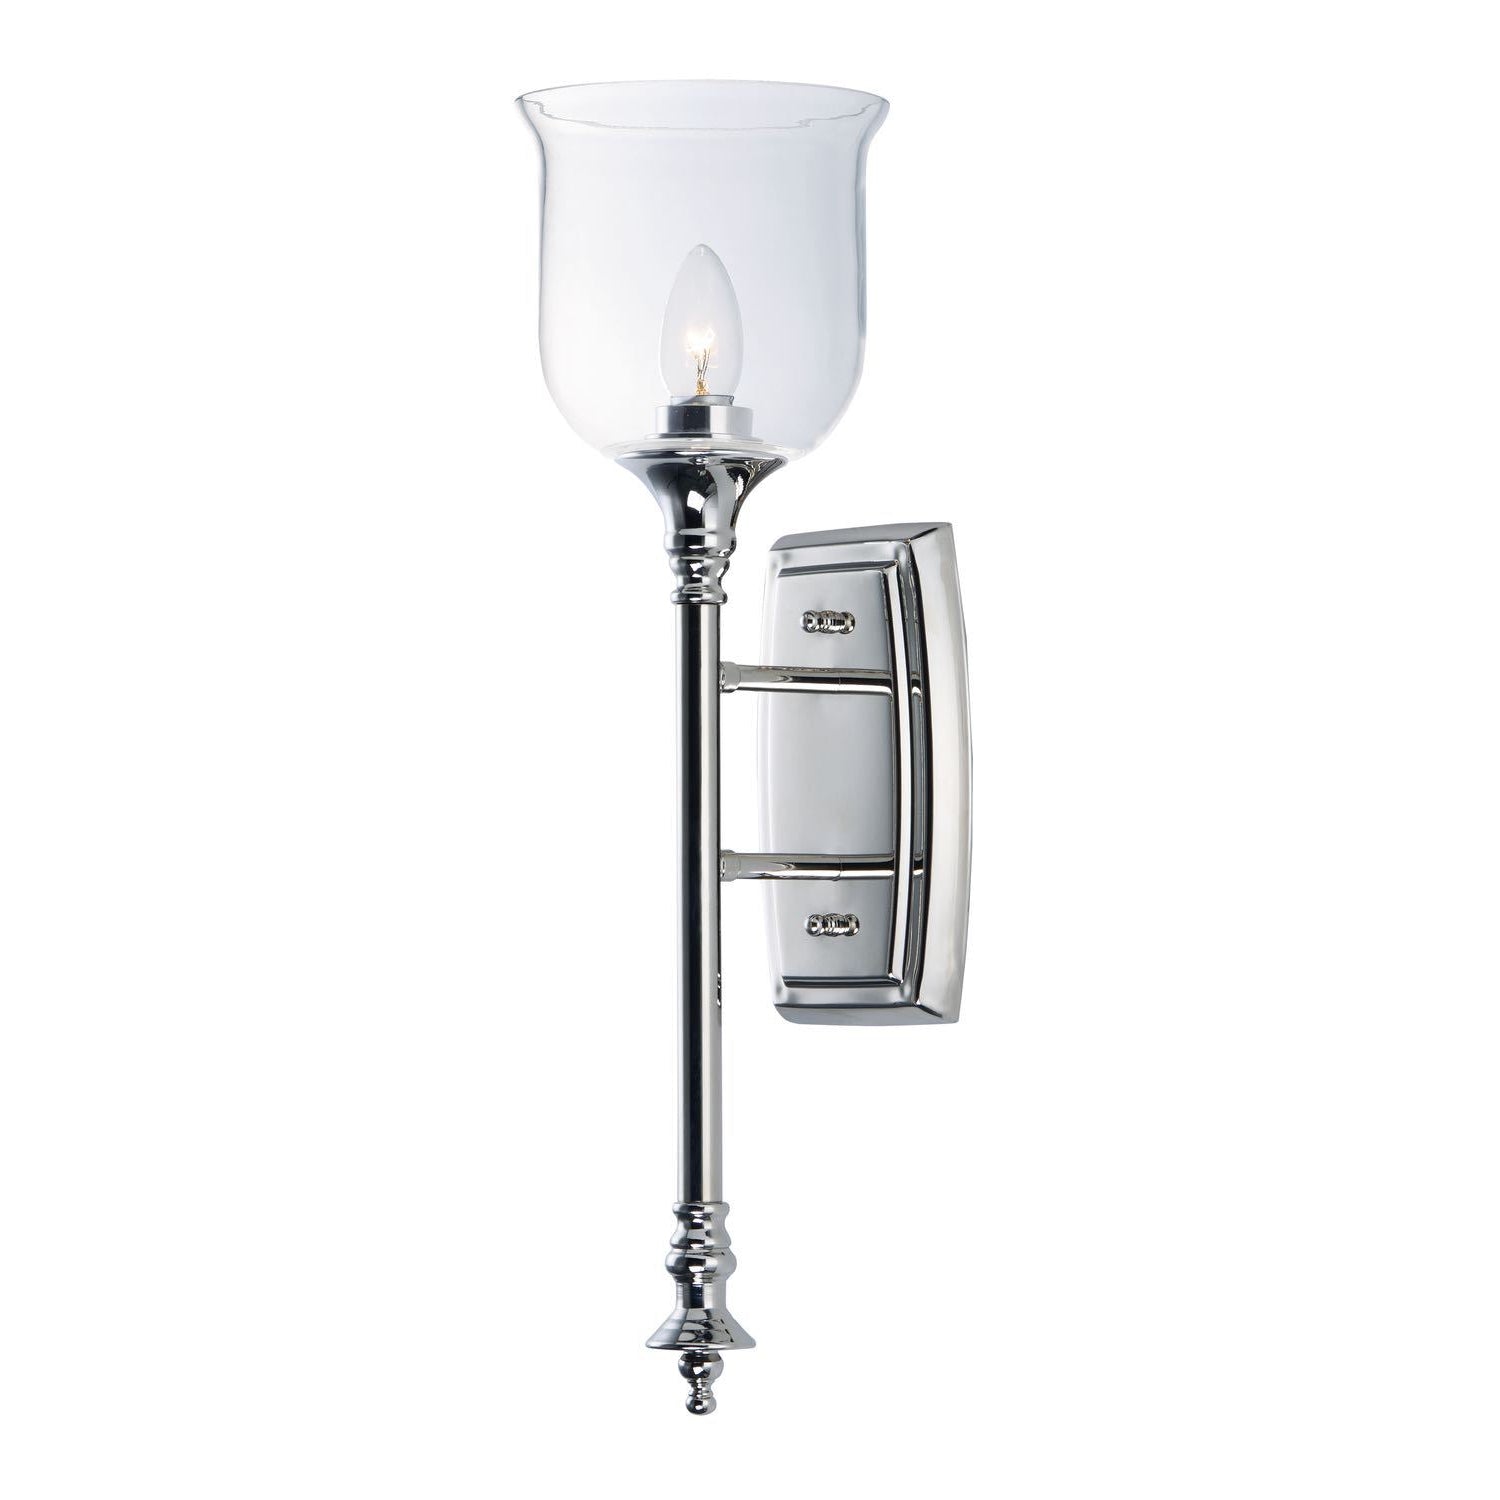 Centennial Sconce Polished Nickel